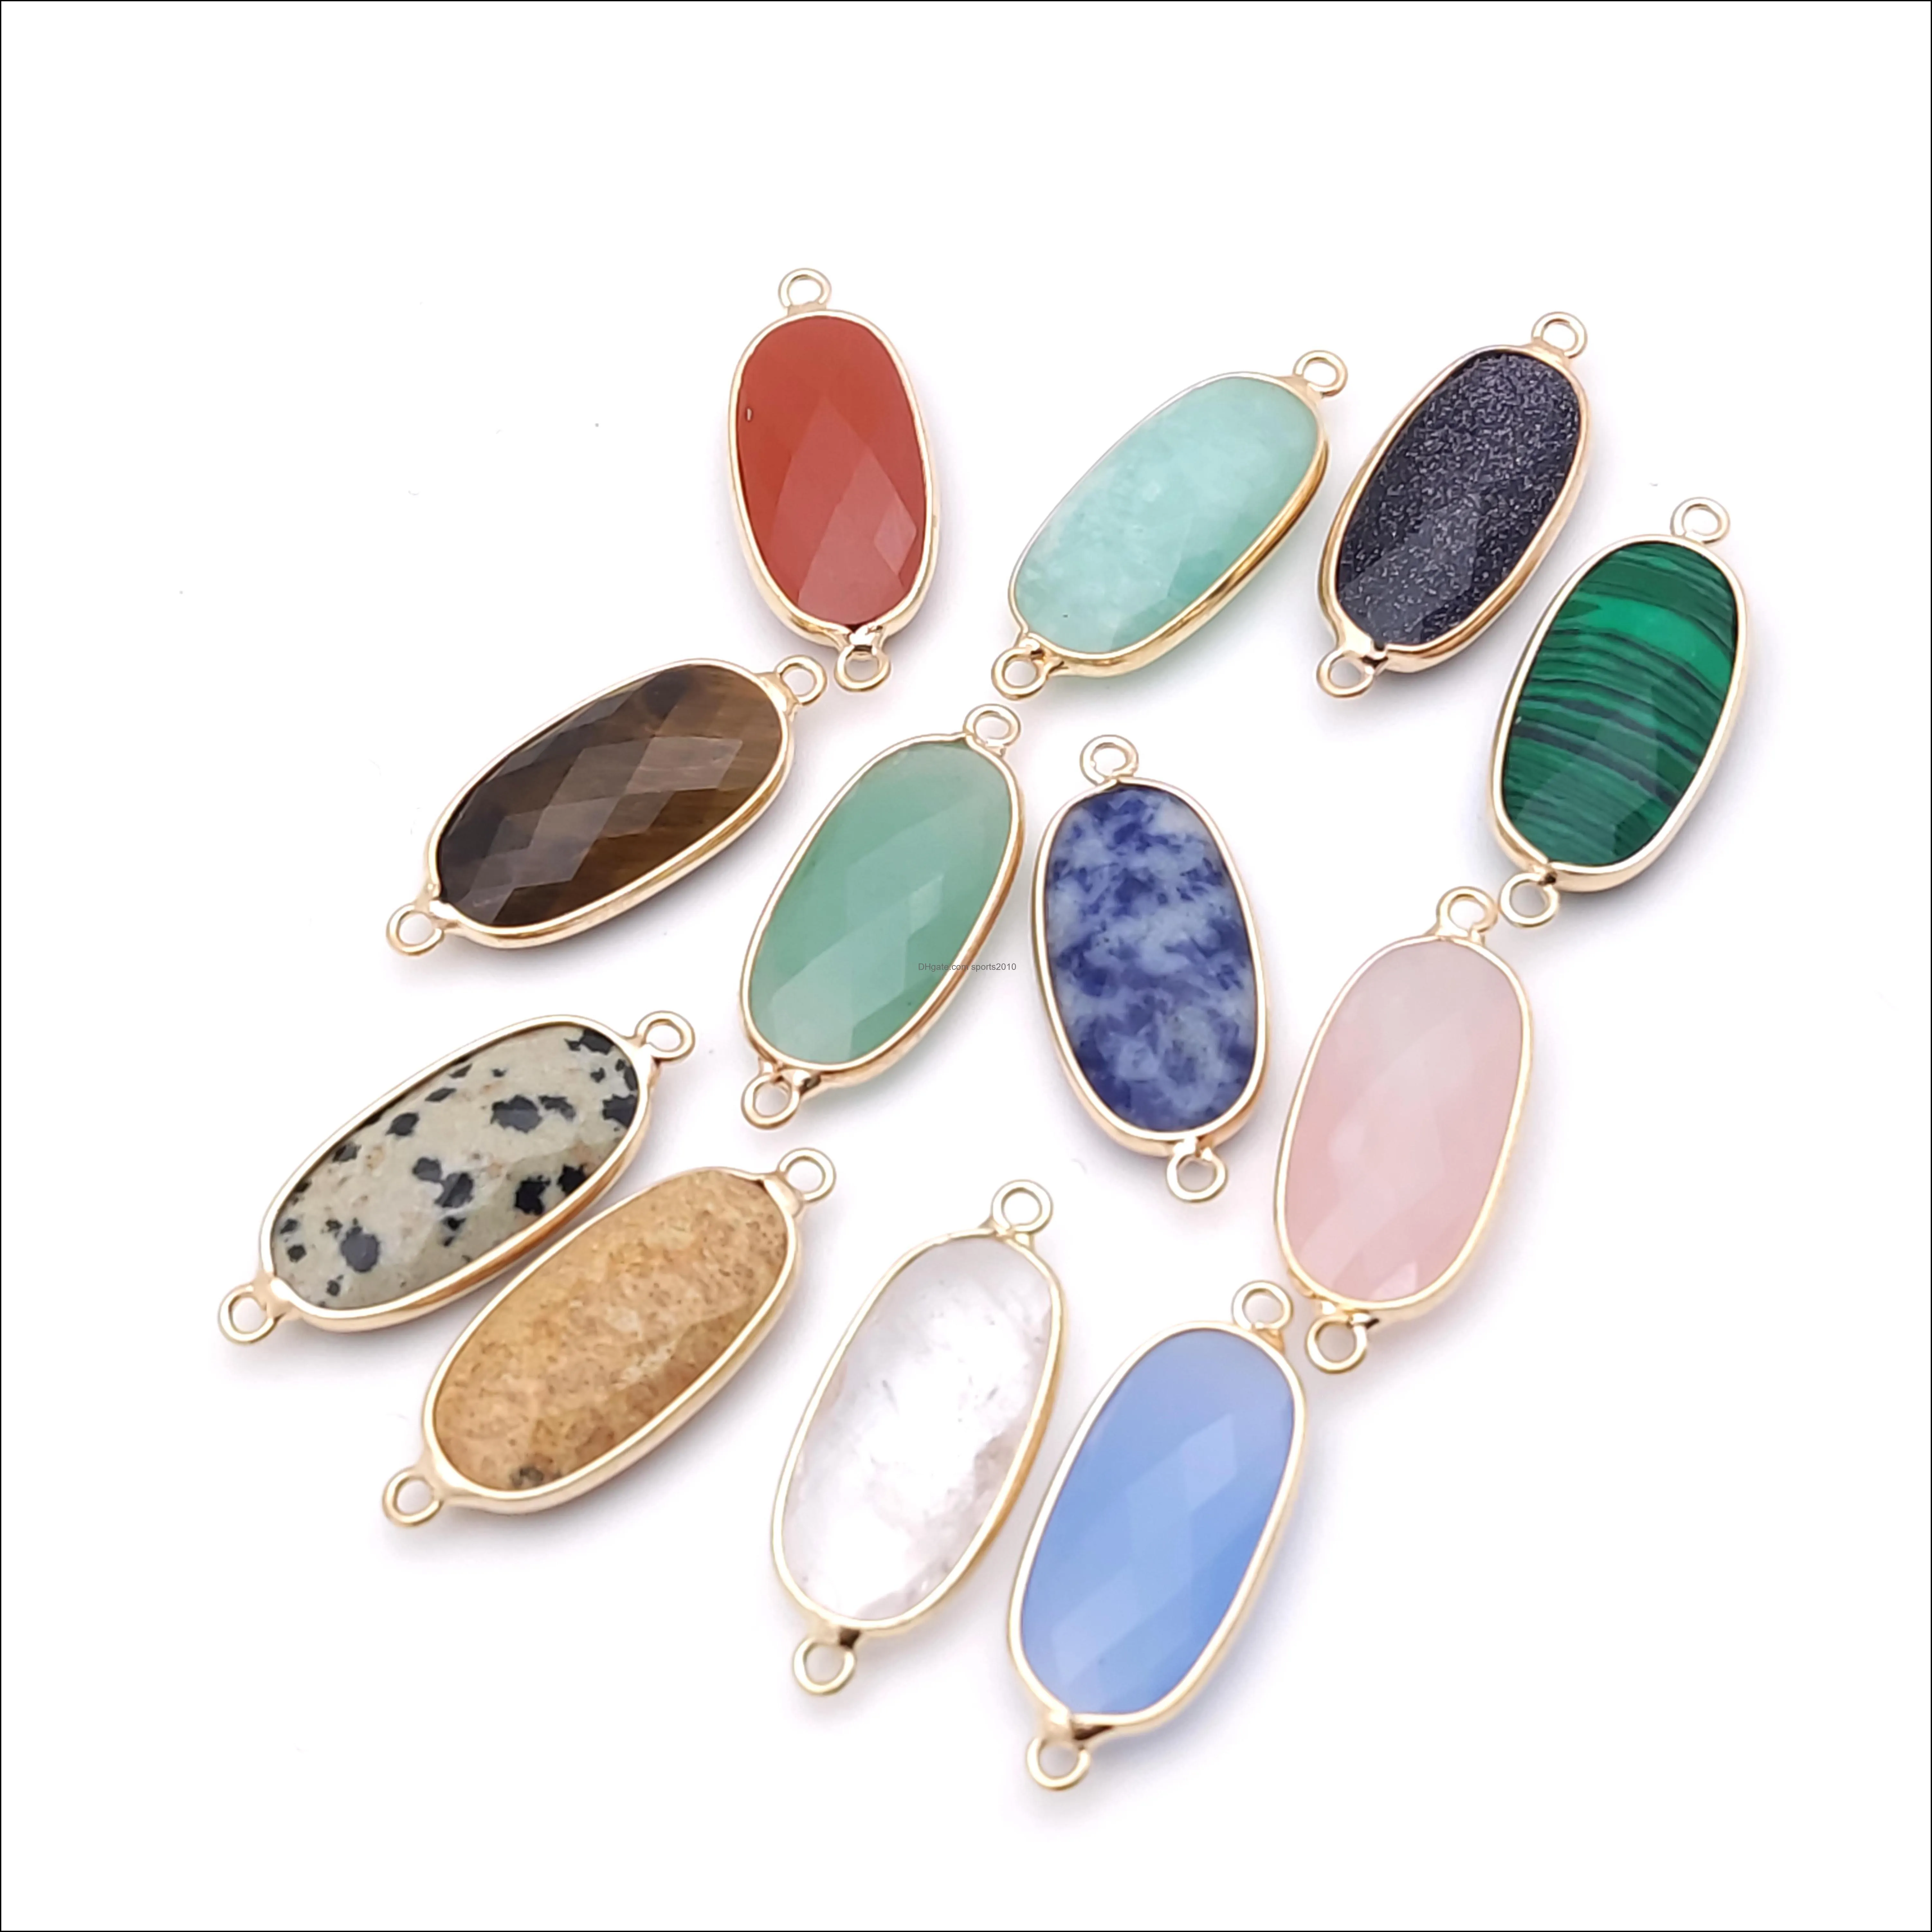 gold edged natural stone charms green rose quartz crystal connector pendant for earrings necklace jewelry making sports2010